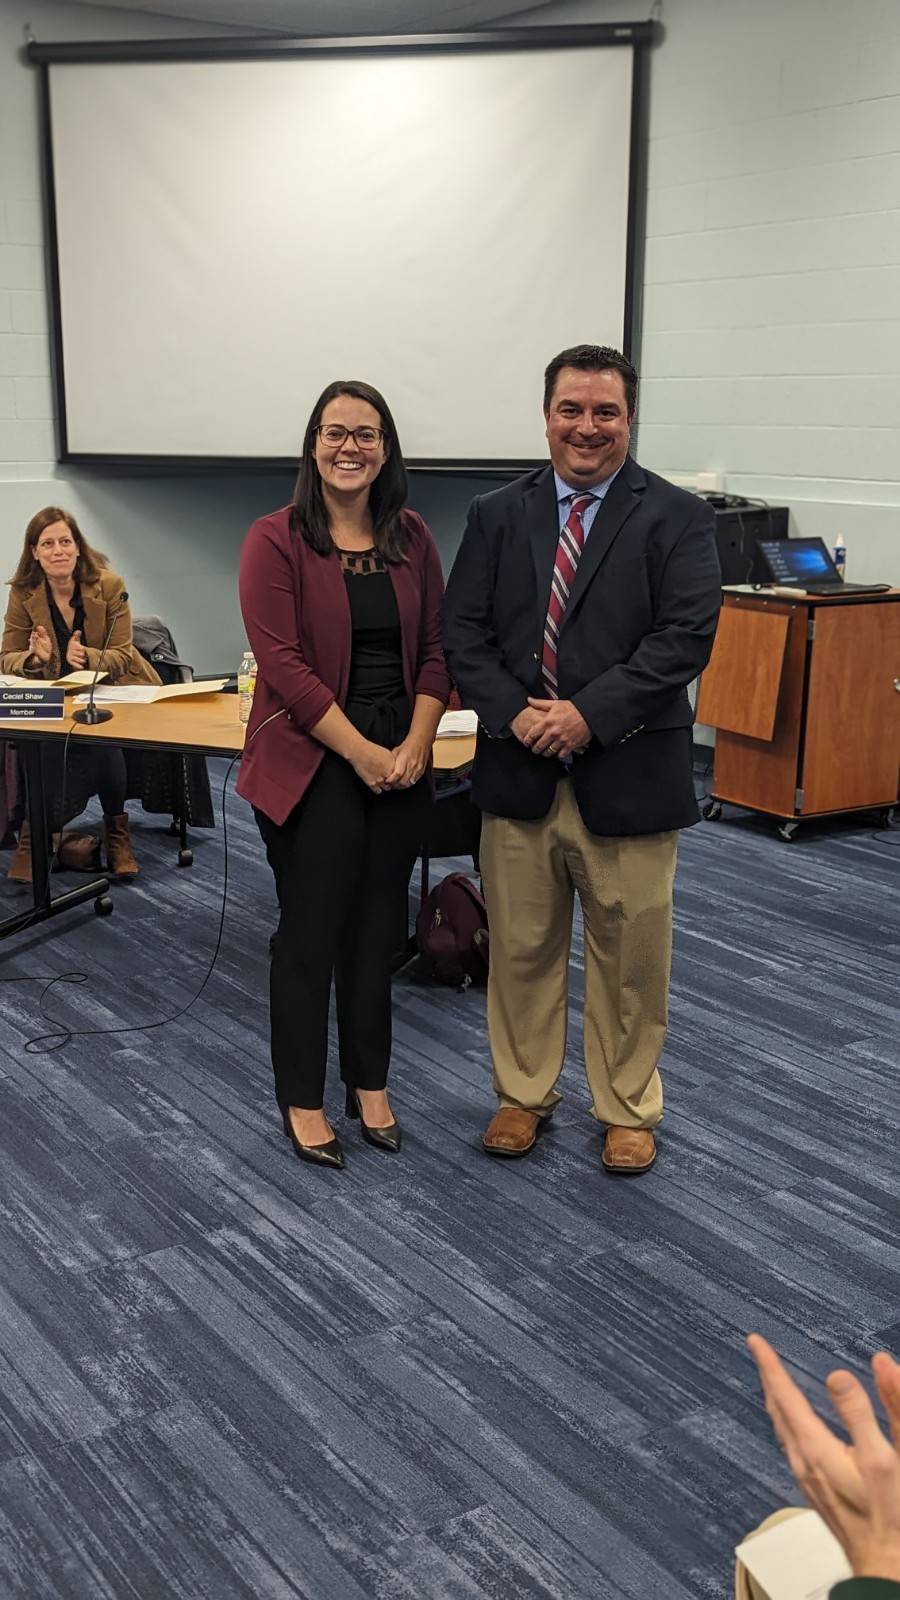 District Treasurer Brittany Treolo and Assistant Superintendent Ryan Bernath